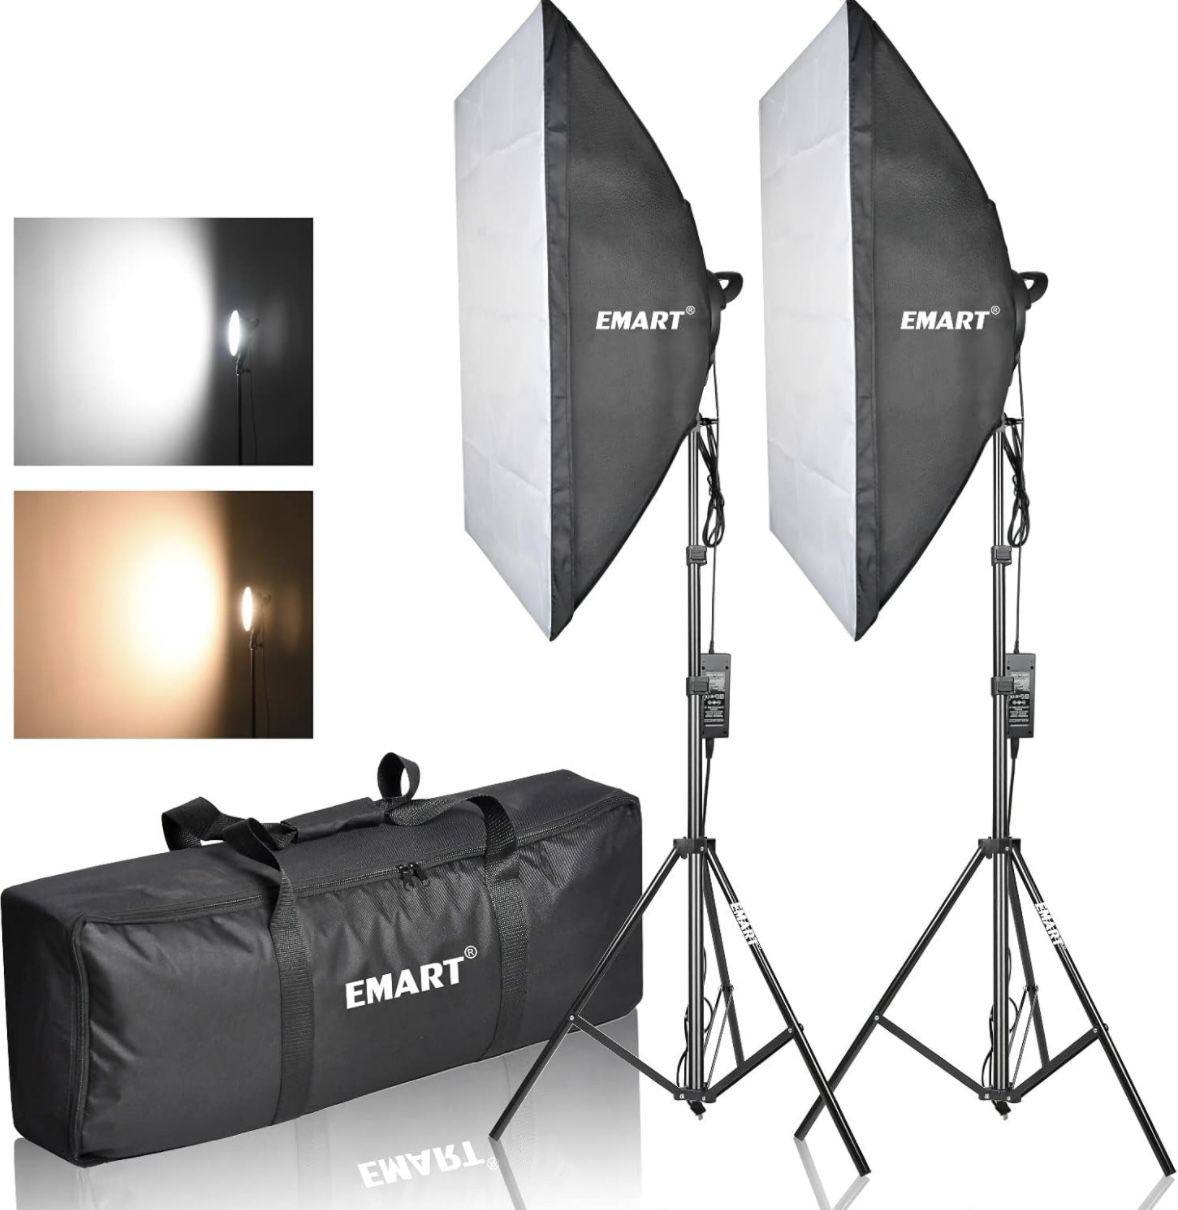 EMART Photography Softbox Lighting Kit, Photo Equipment Studio Softbox 20" x 27", 45W Dimmable LED with Double Color Temperature for Portrait Video an